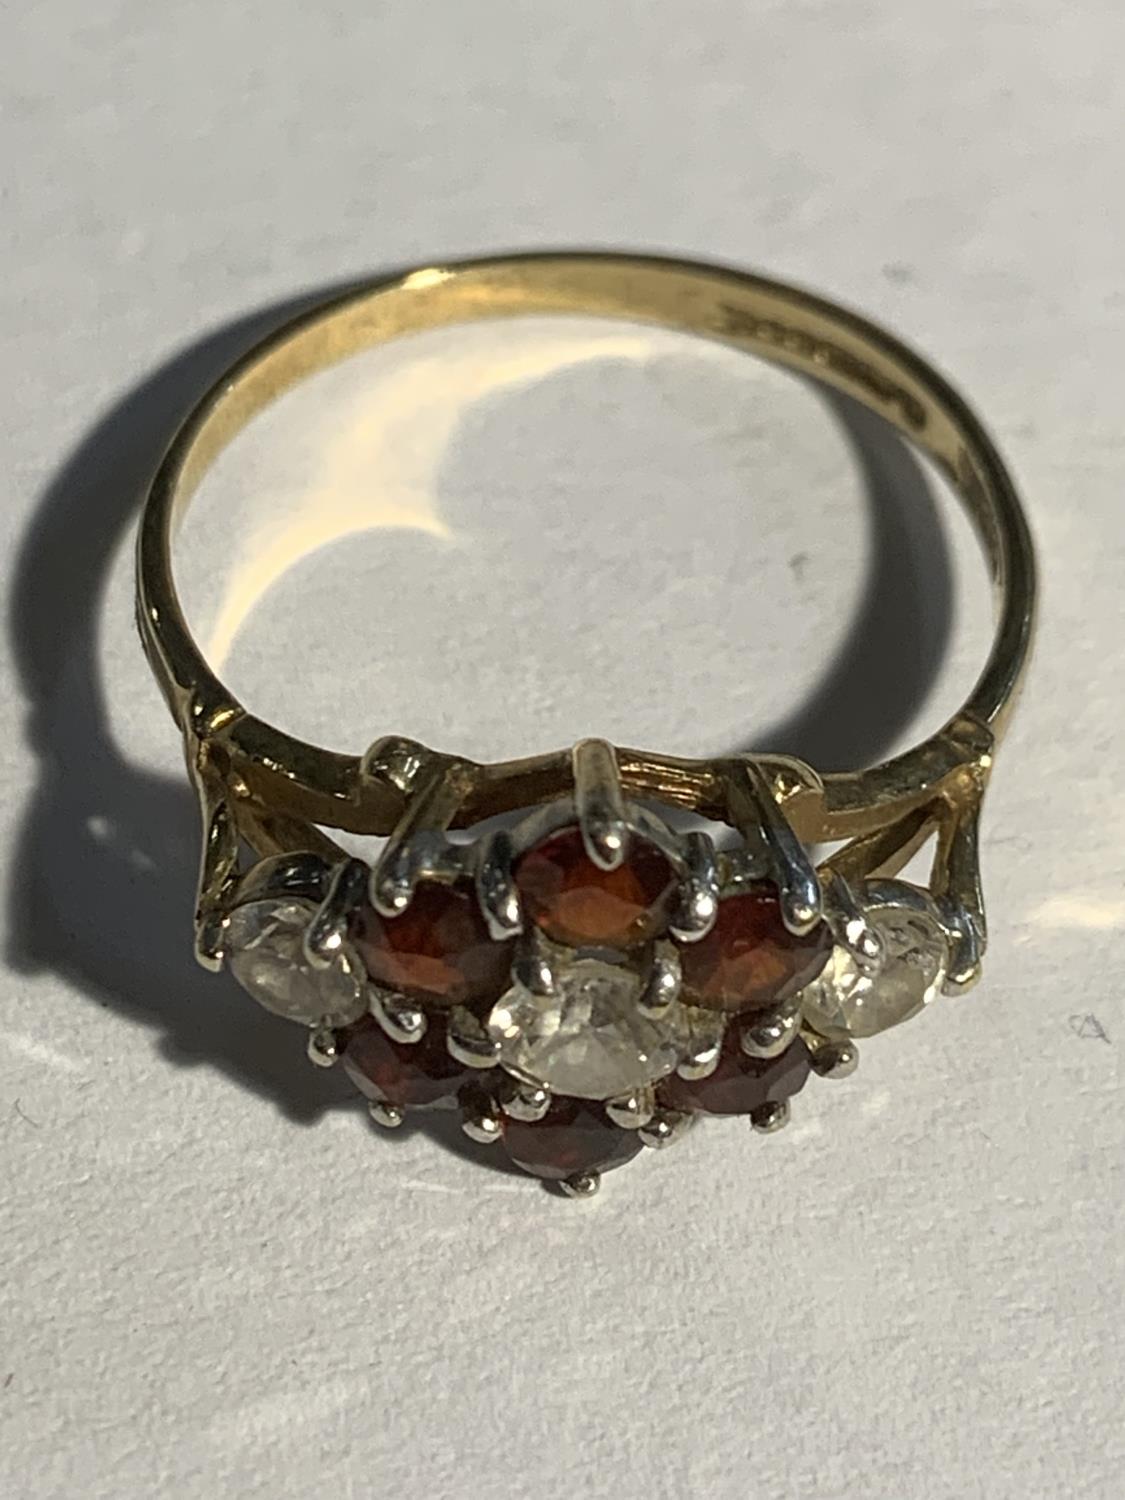 A 9 CARAT GOLD RING WITH THREE CLEAR STONES AND SIX RED STONES IN A FLOWER DESIGN SIZE Q GROSS - Image 2 of 3